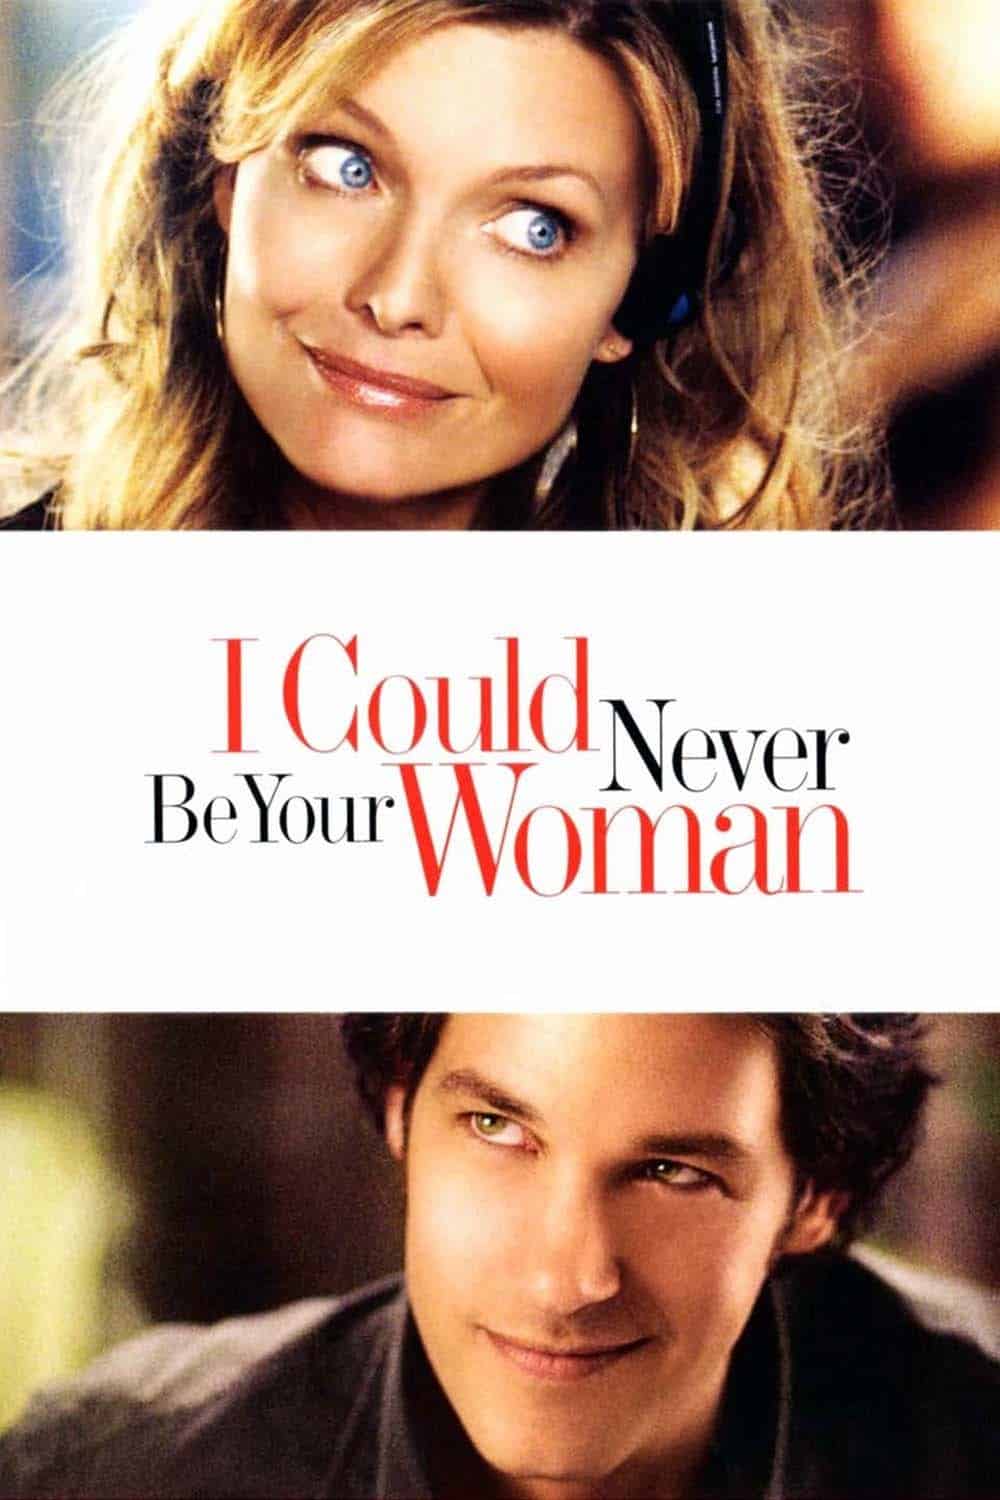 I Could Never Be Your Woman, 2007 